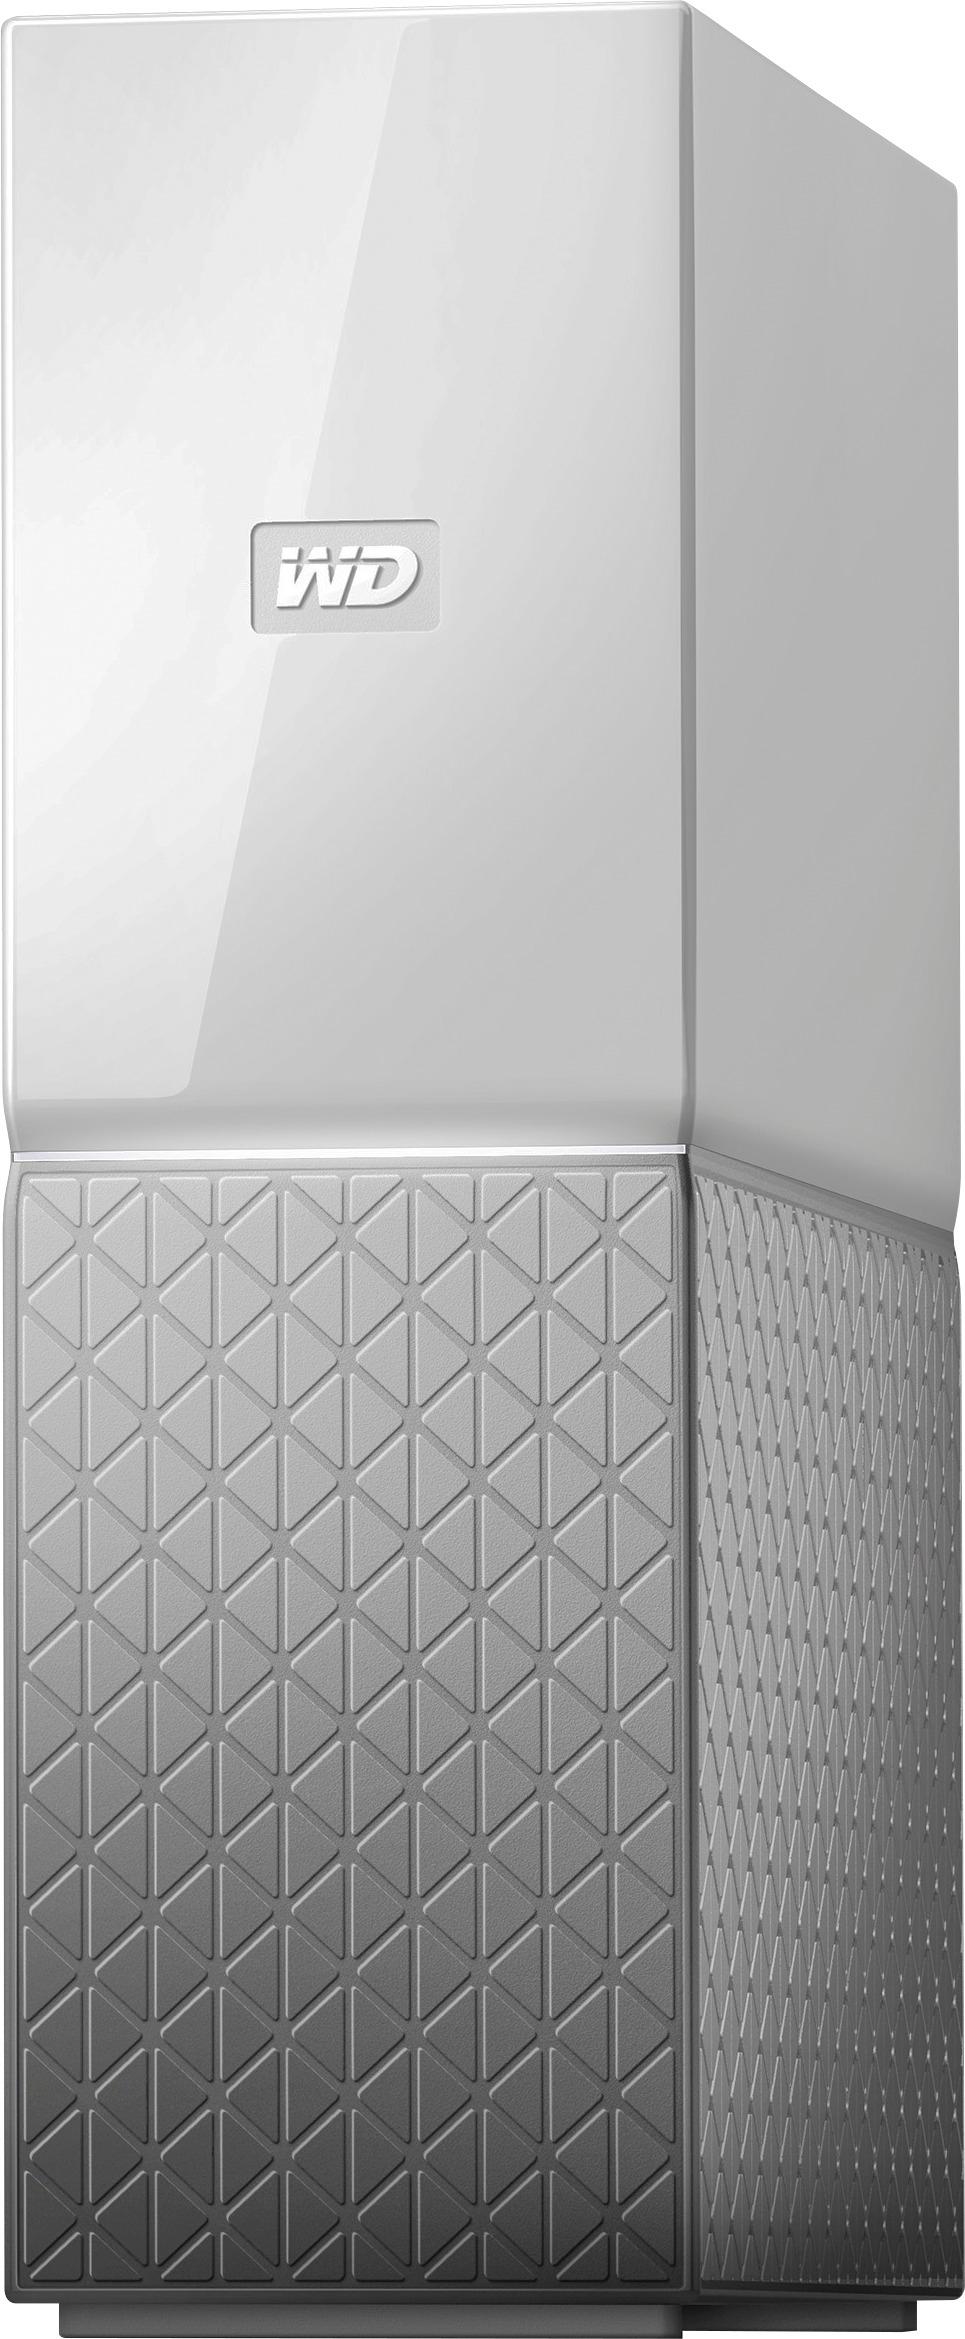 WD My Cloud Home 4TB Personal Cloud White WDBVXC0040HWT-NESN - Best Buy